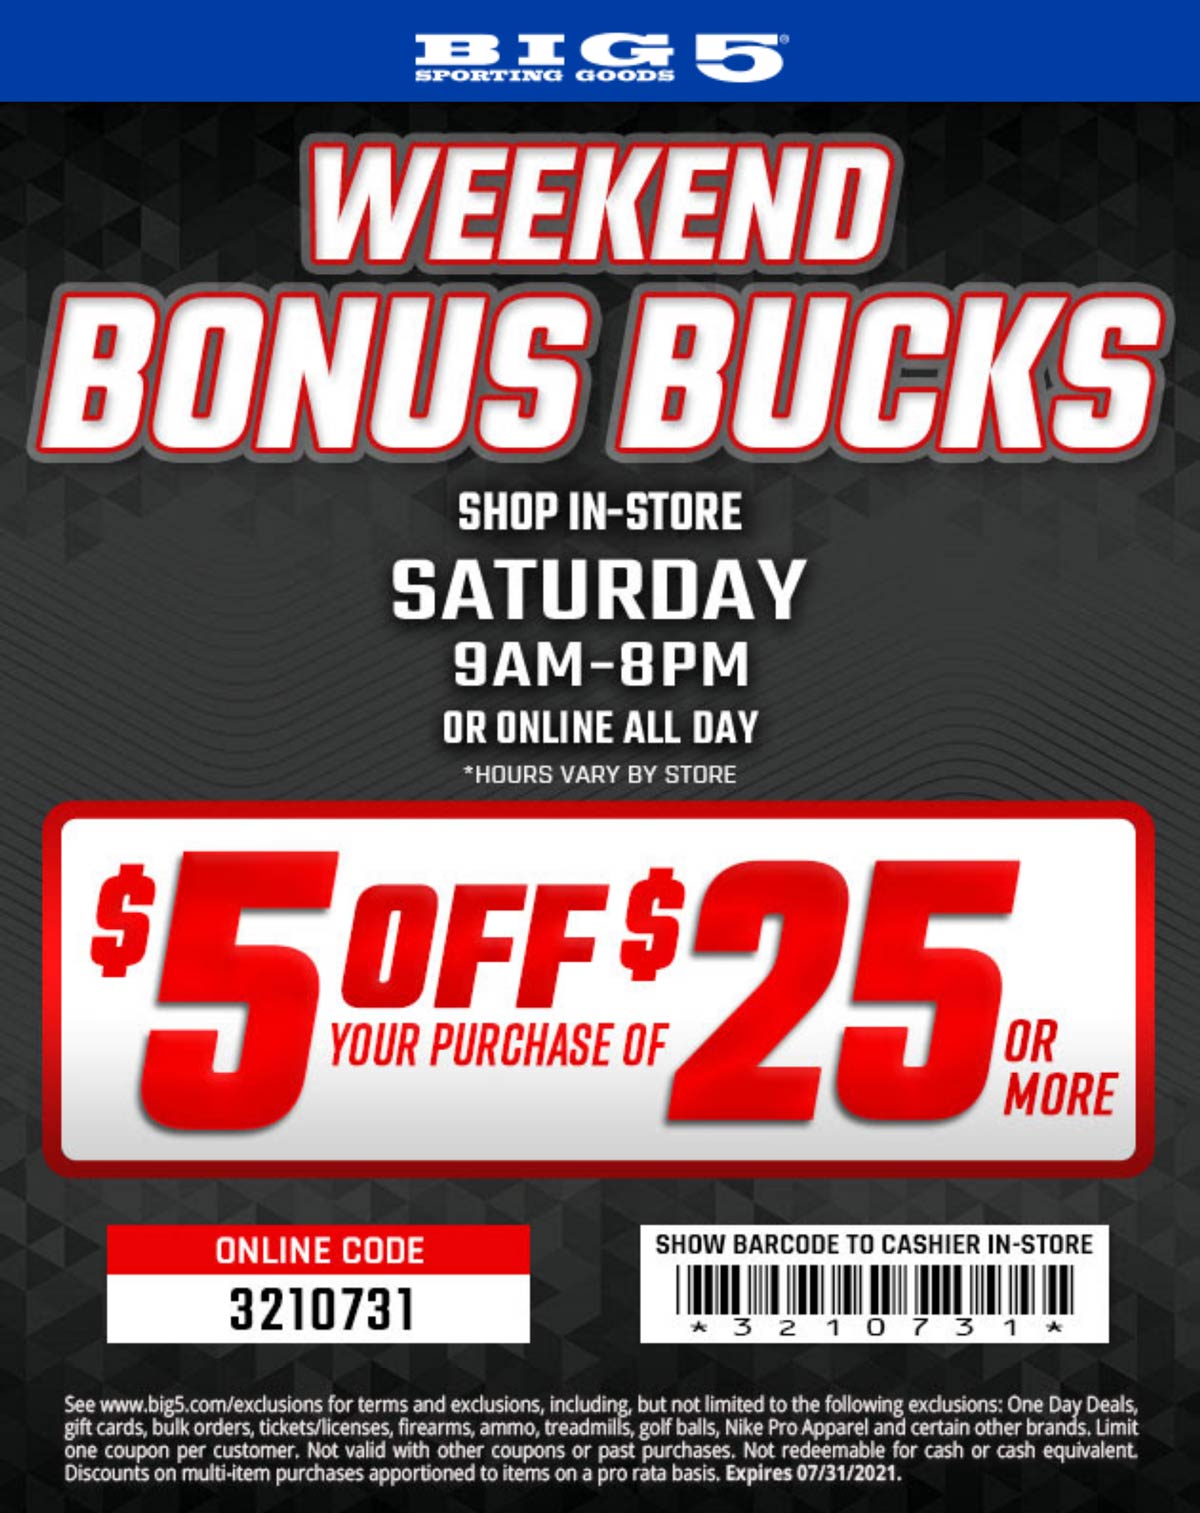 Big 5 stores Coupon  $5 off $25 today at Big 5 sporting goods, or online via promo code 3210731 #big5 